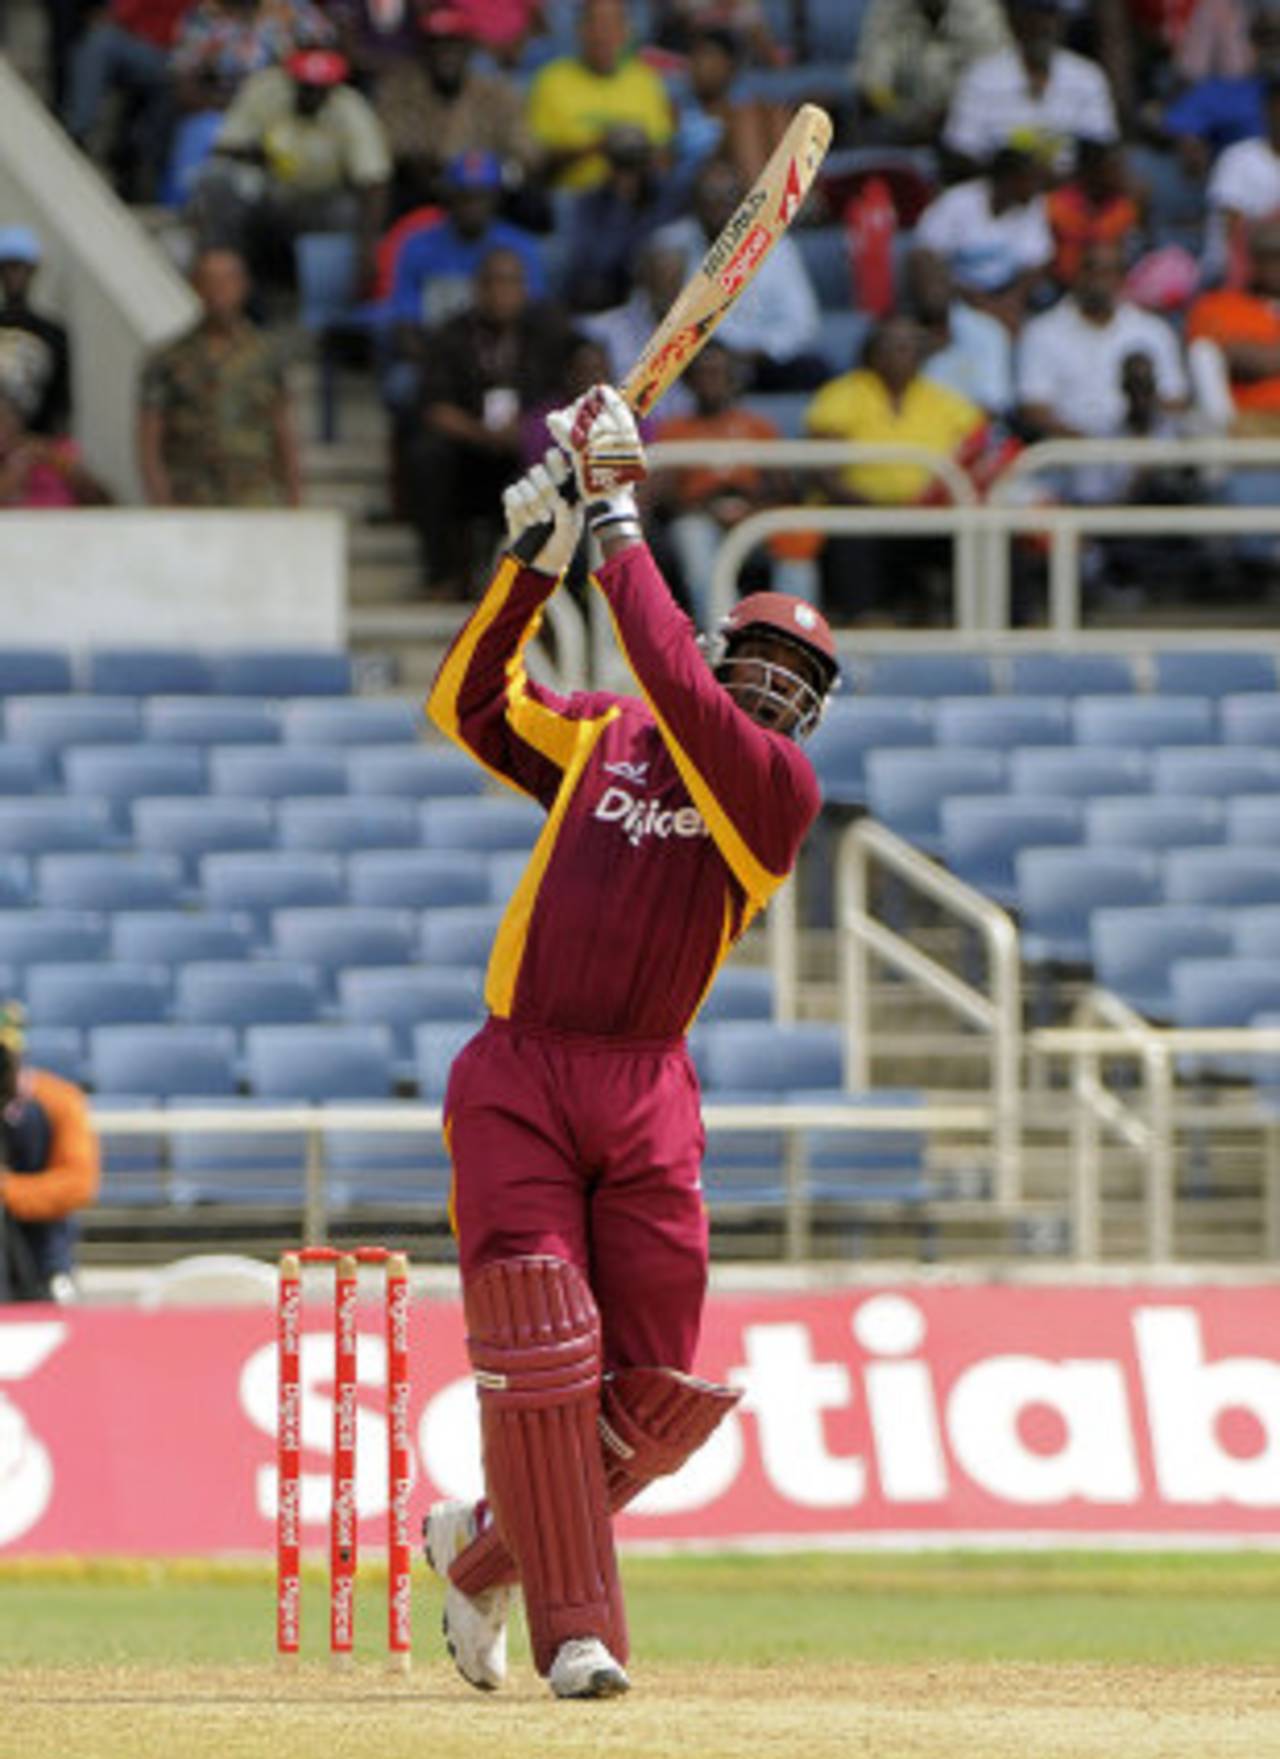 Simon Doull: "For all Gayle's spectacular hitting in T20 leagues, his true place was in international cricket for the West Indies"&nbsp;&nbsp;&bull;&nbsp;&nbsp;WICB